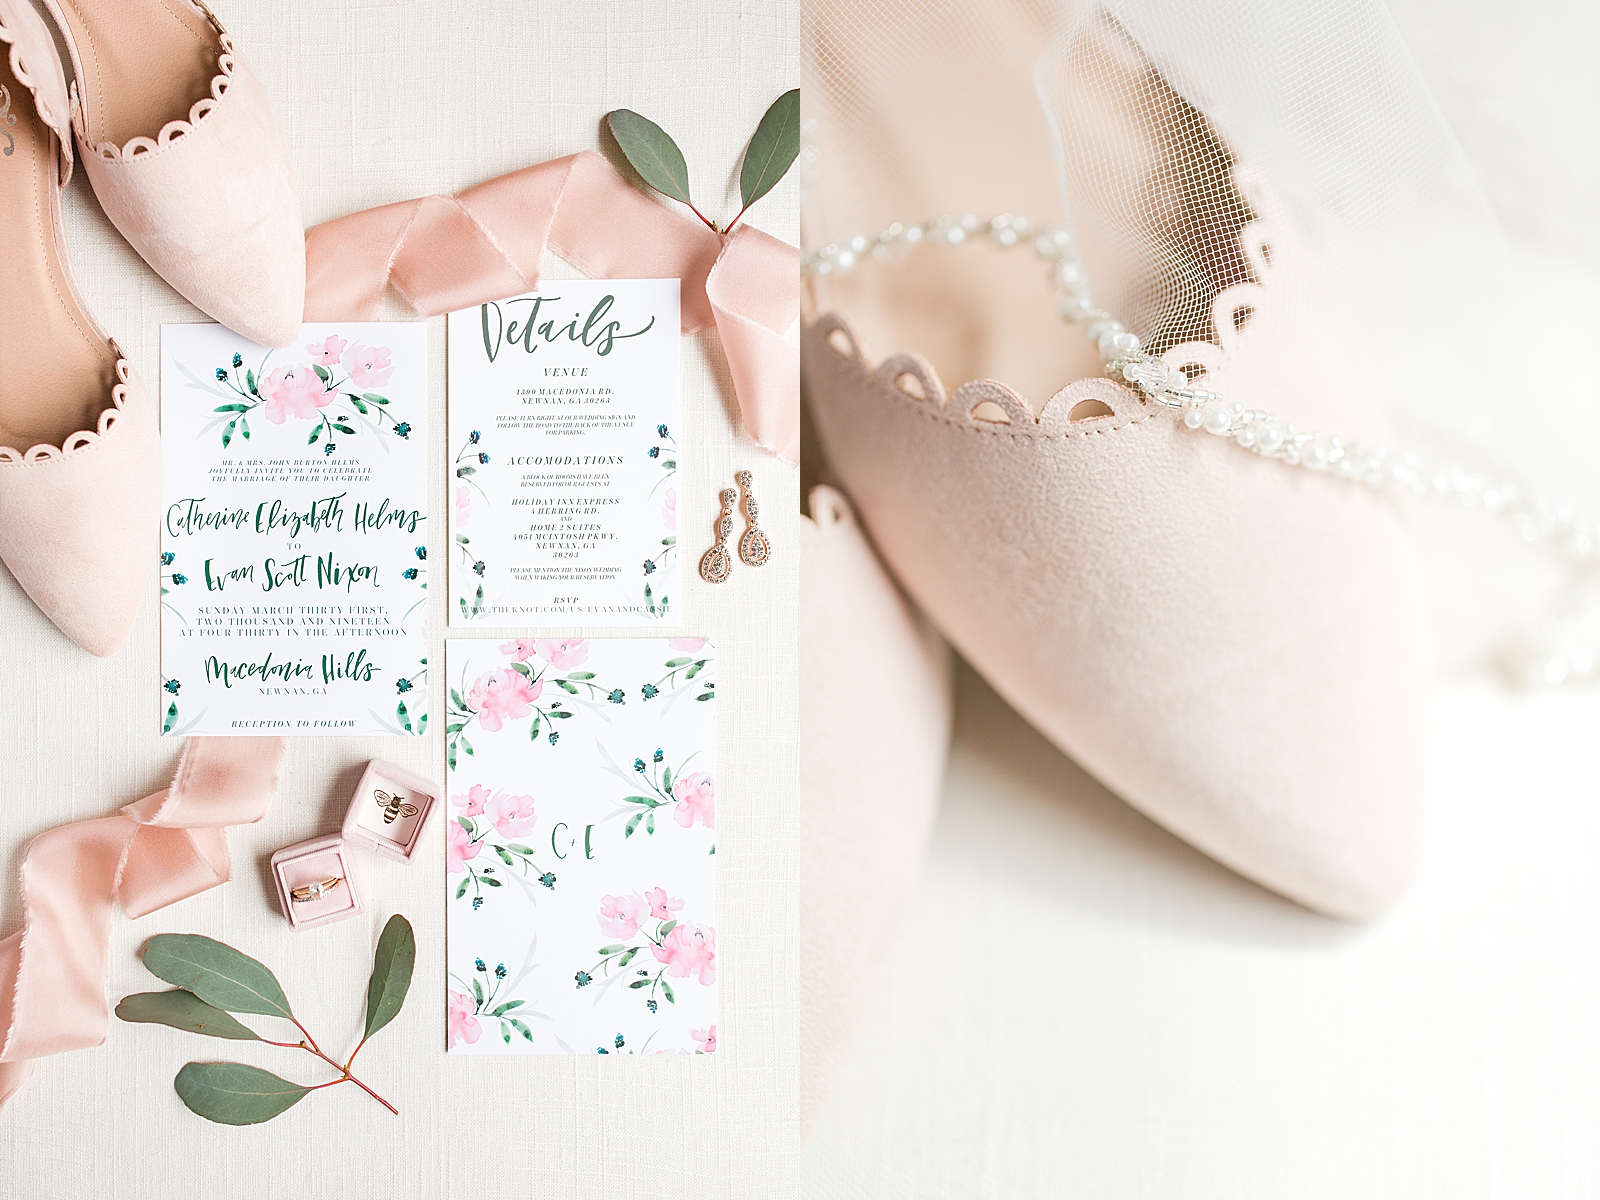 Macedonia Hills Wedding Invitation Suite with Brides shoes and Veil Photos